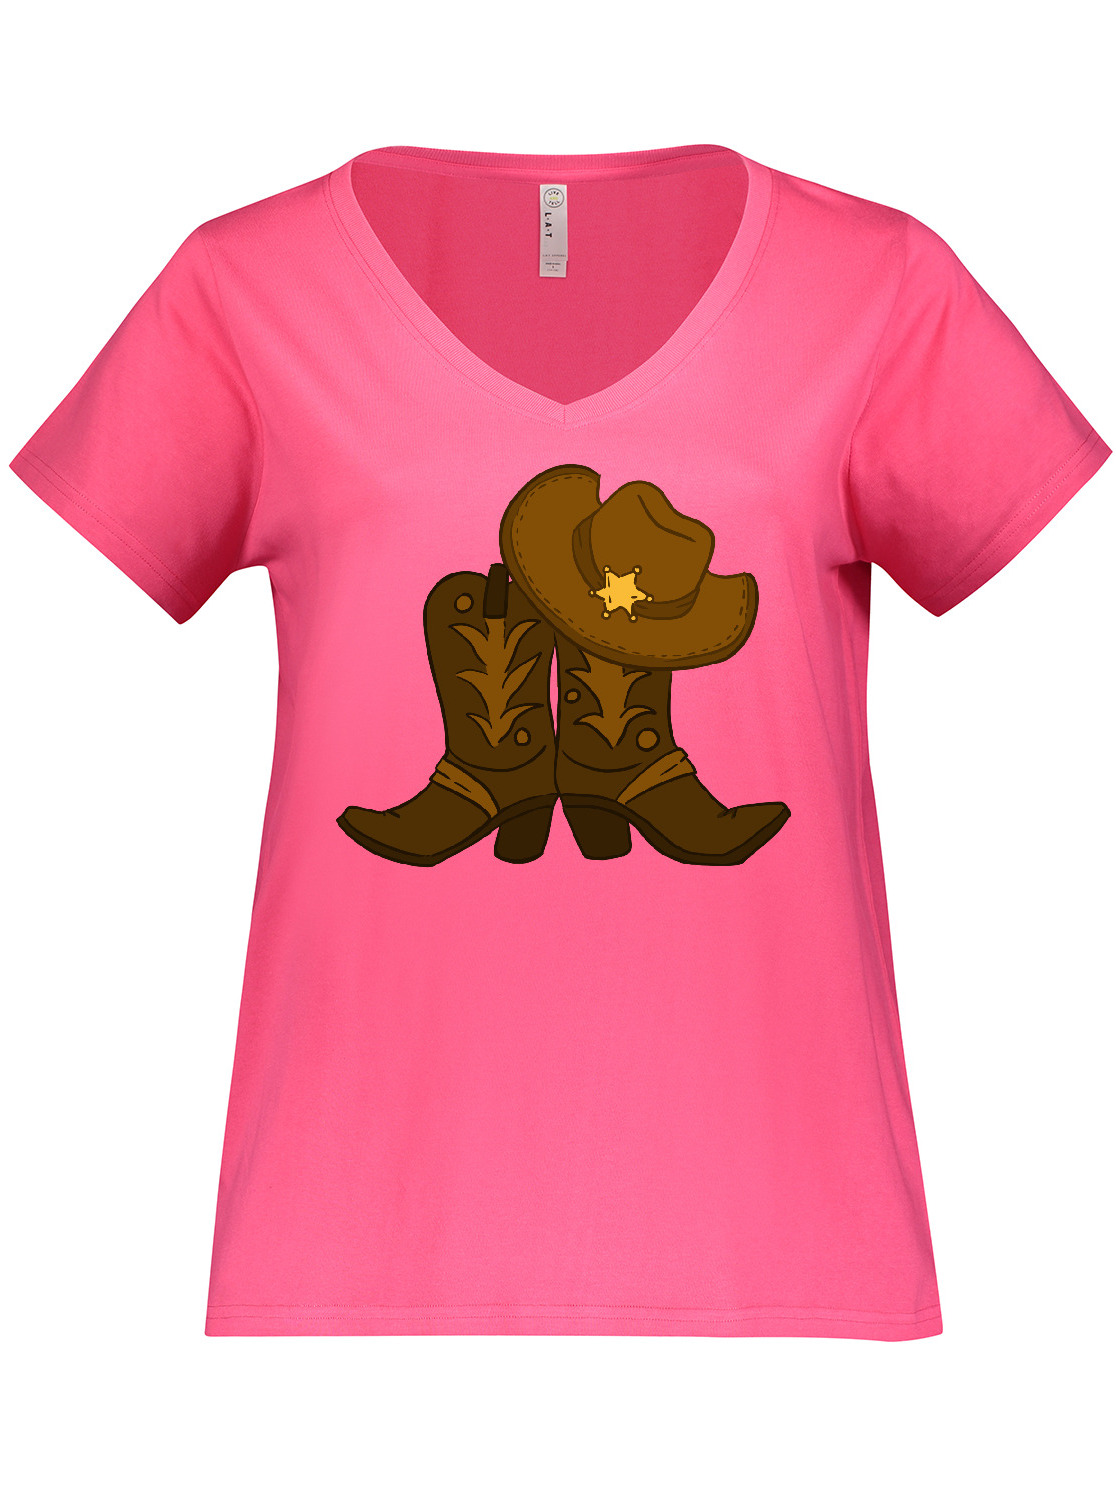 Inktastic Sheriff Hat With Boots Women's Plus Size V-Neck T-Shirt - image 1 of 4